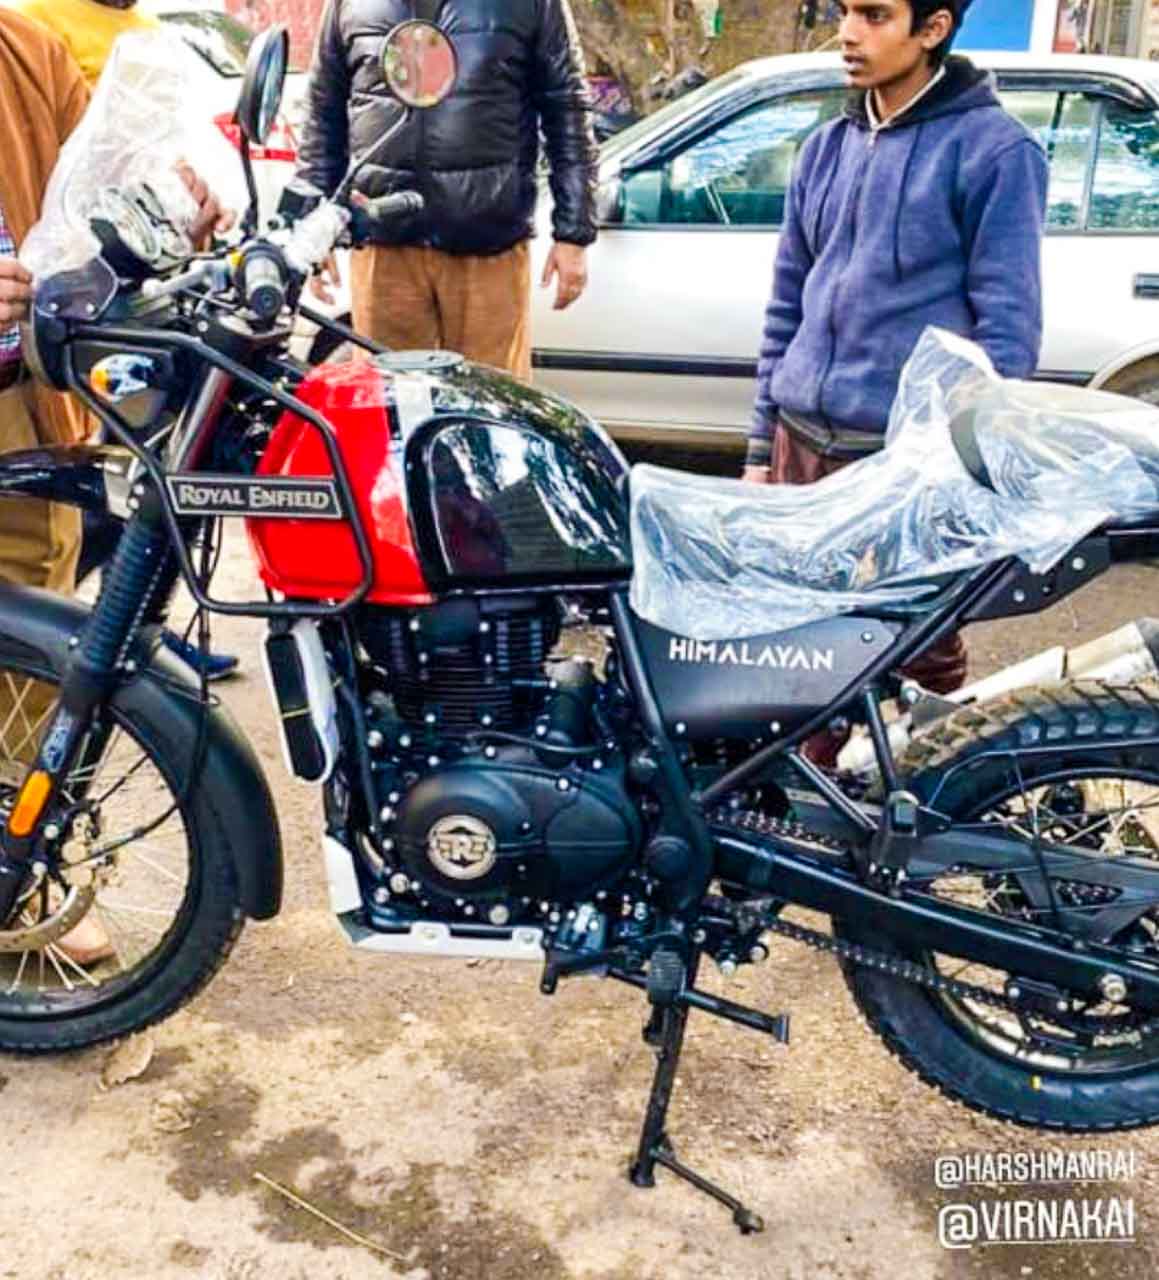 Royal Enfield Himalayan BS6 spied